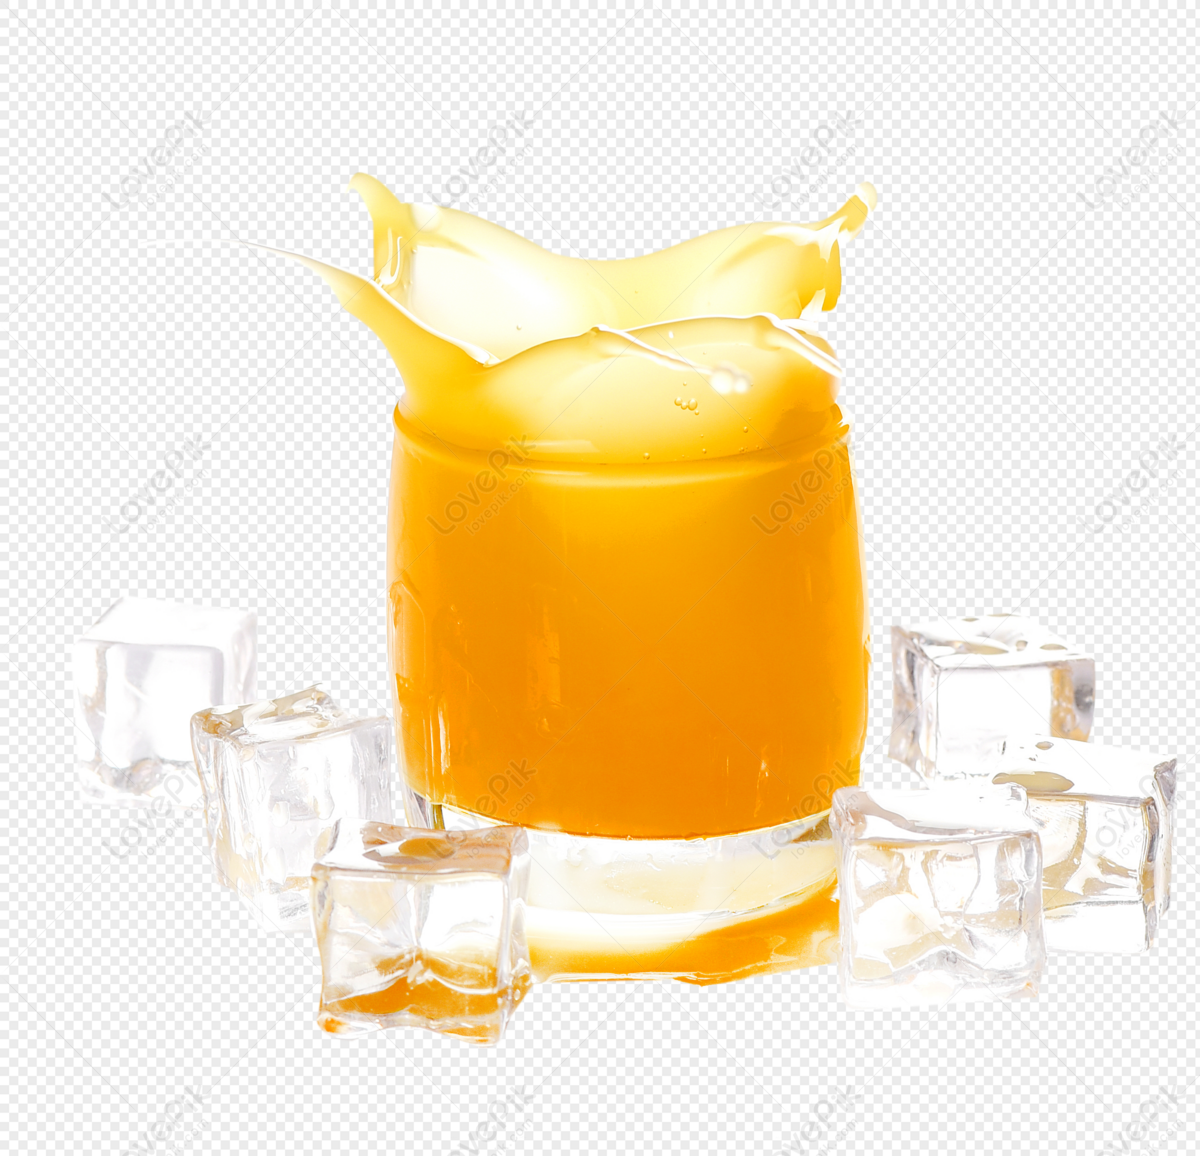 Orange Juice With Mango Juice On Ice PNG Transparent Background And Clipart  Image For Free Download - Lovepik | 400571010